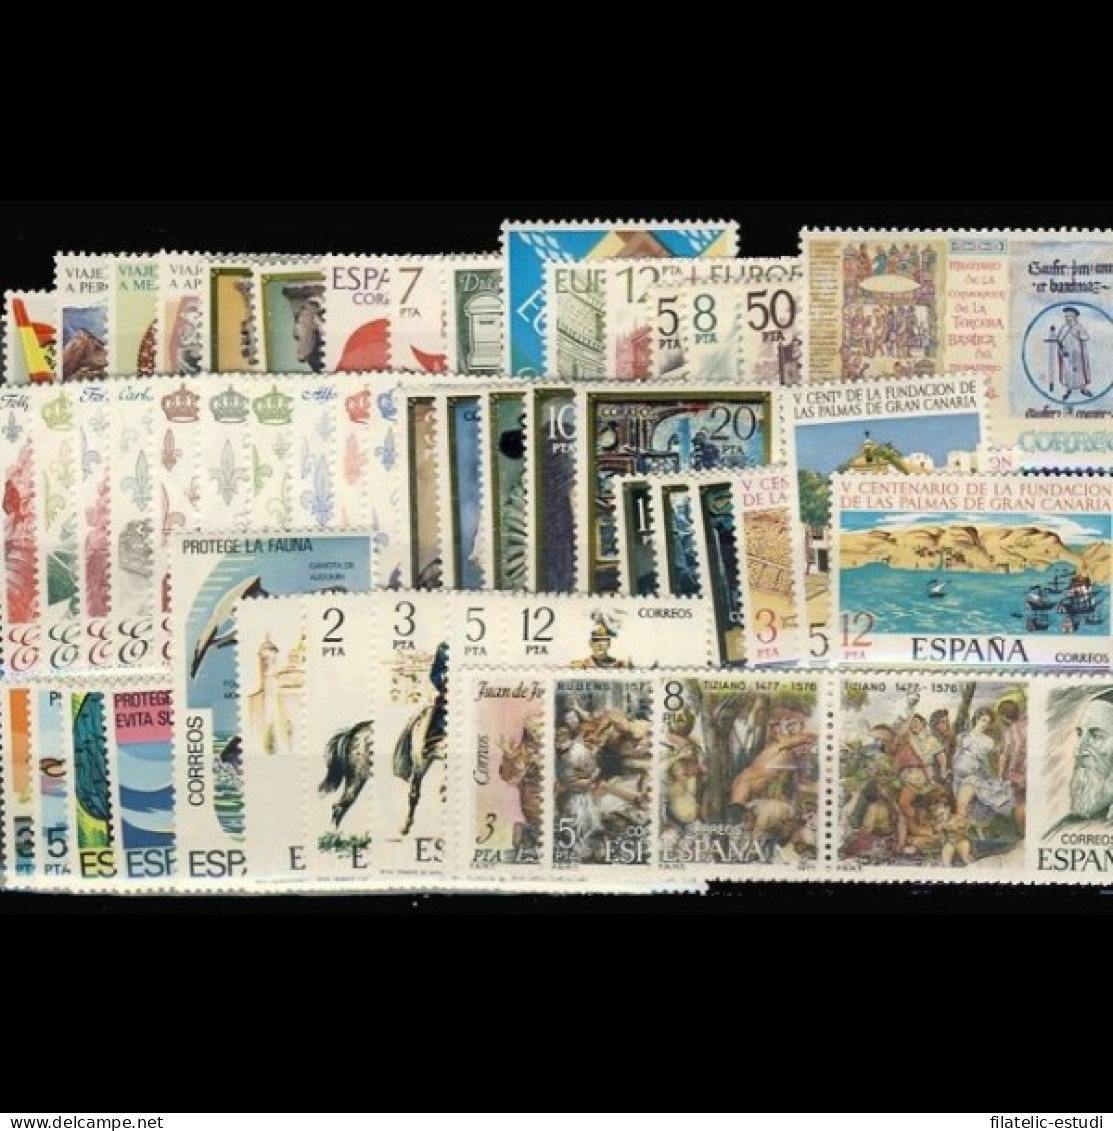 España Spain Año Completo Year Complete 1978 MNH - Annate Complete